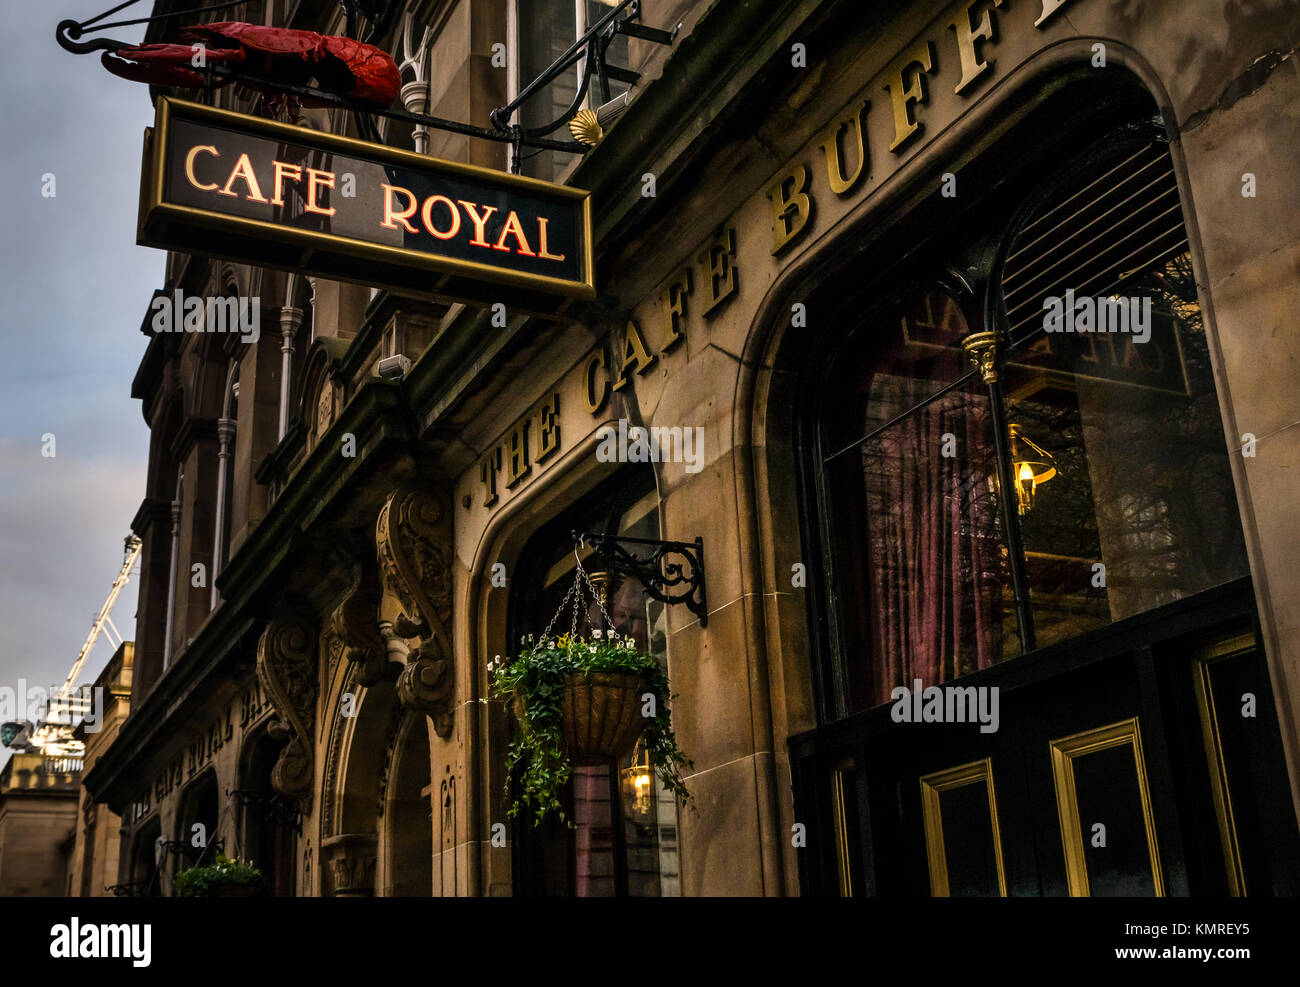 Cafe Royal Bar, famous Victorian pub, Edinburgh city centre, Scotland, UK, with name sign and lobster seafood sign Stock Photo